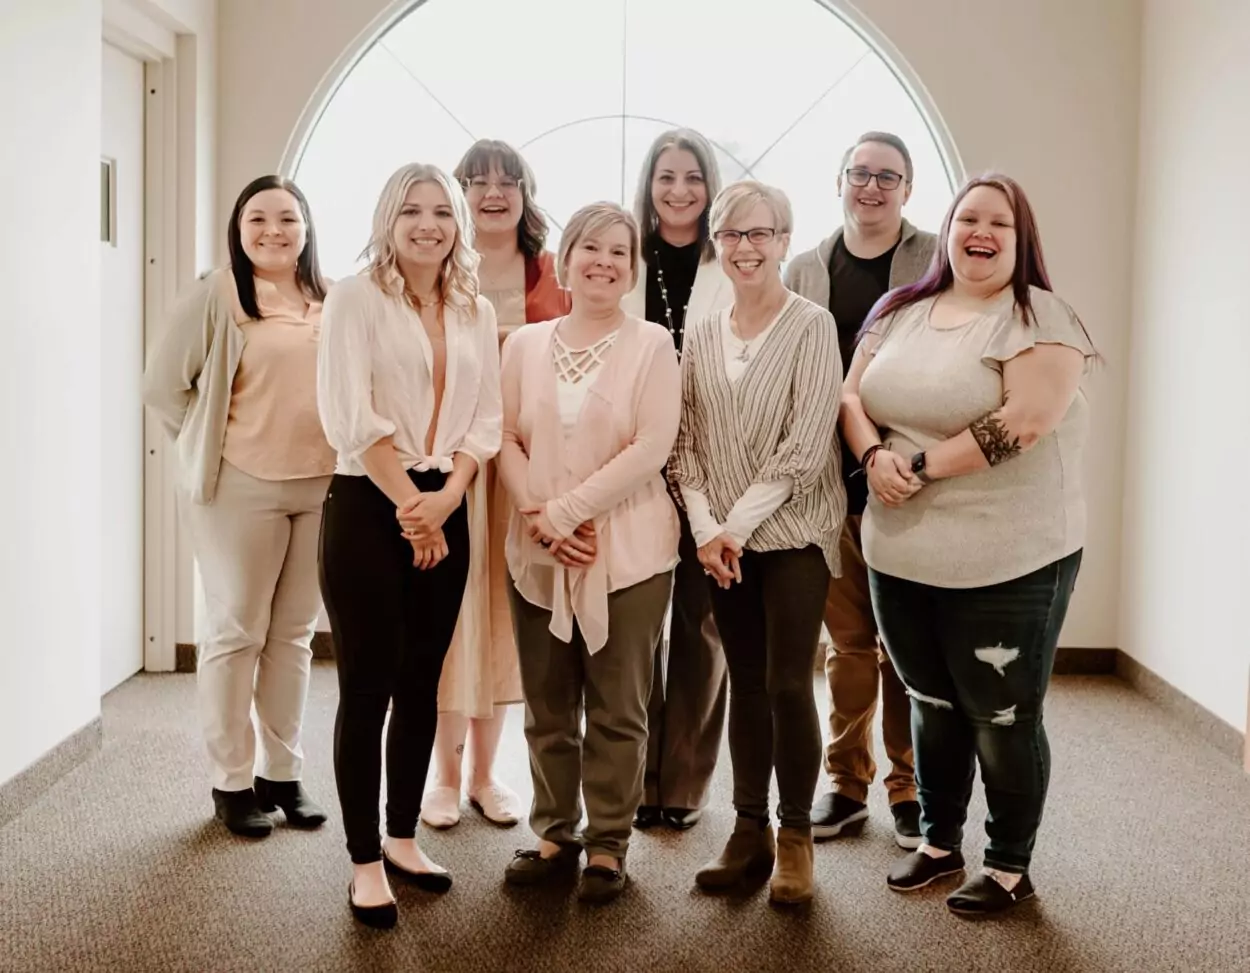 The staff of Intera standing in front of a bay window. Back row from left to right: Alexis, Amanda, Mary, and Jarrod. Front row from left to right: Rosemary, Angela, Sandy, and Taylour.